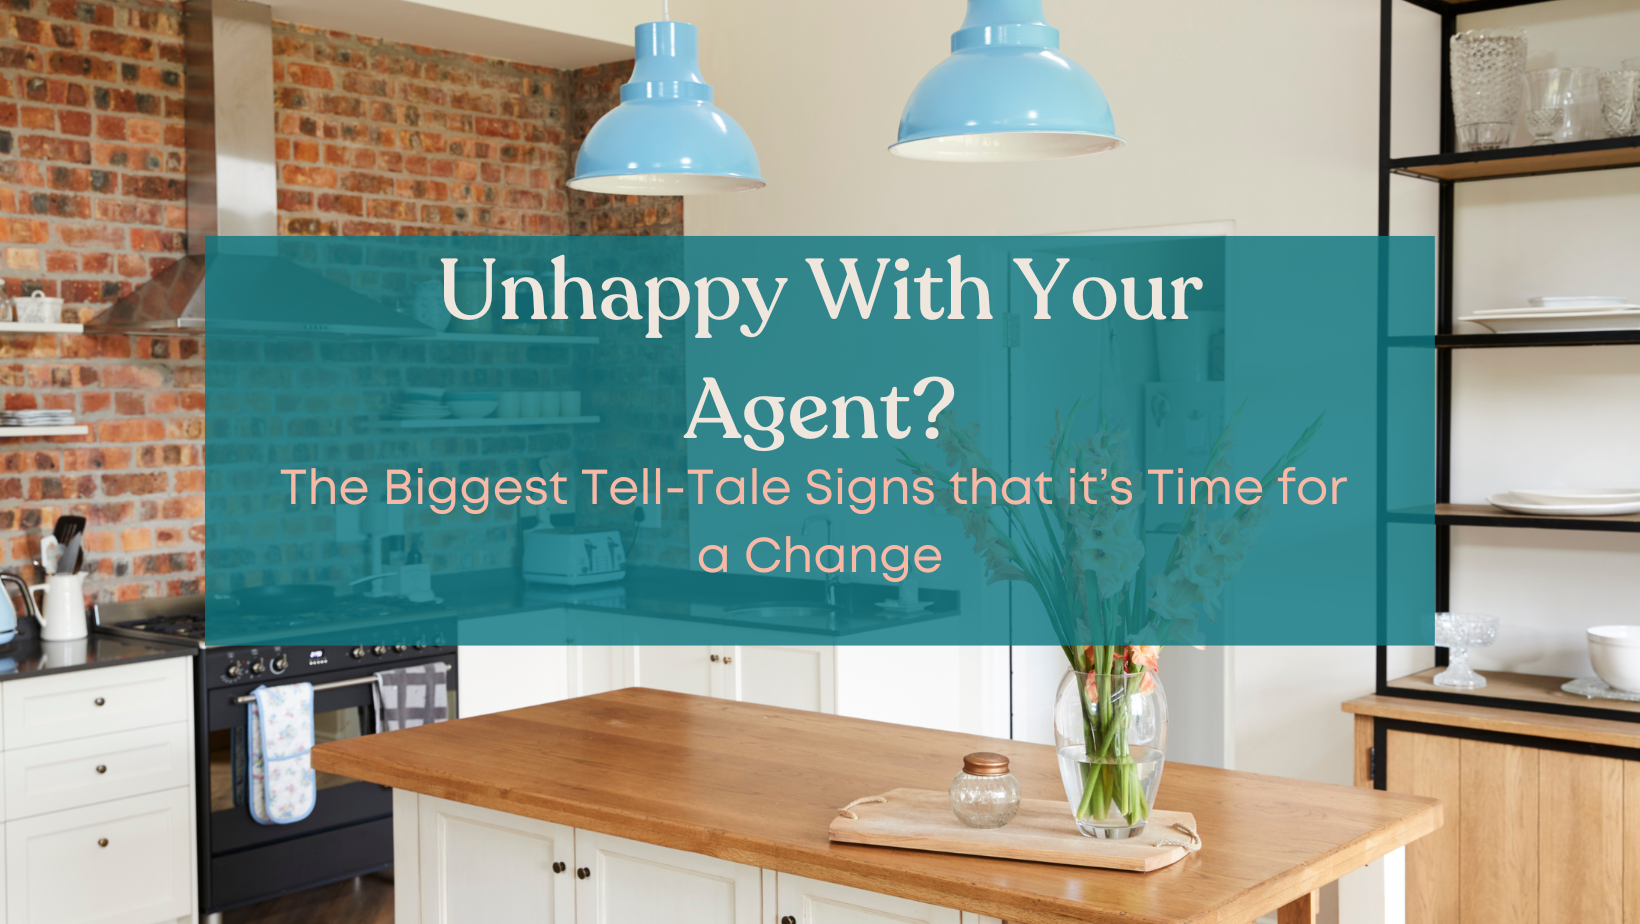 Unhappy With Agent? Signs it’s Time for a Change